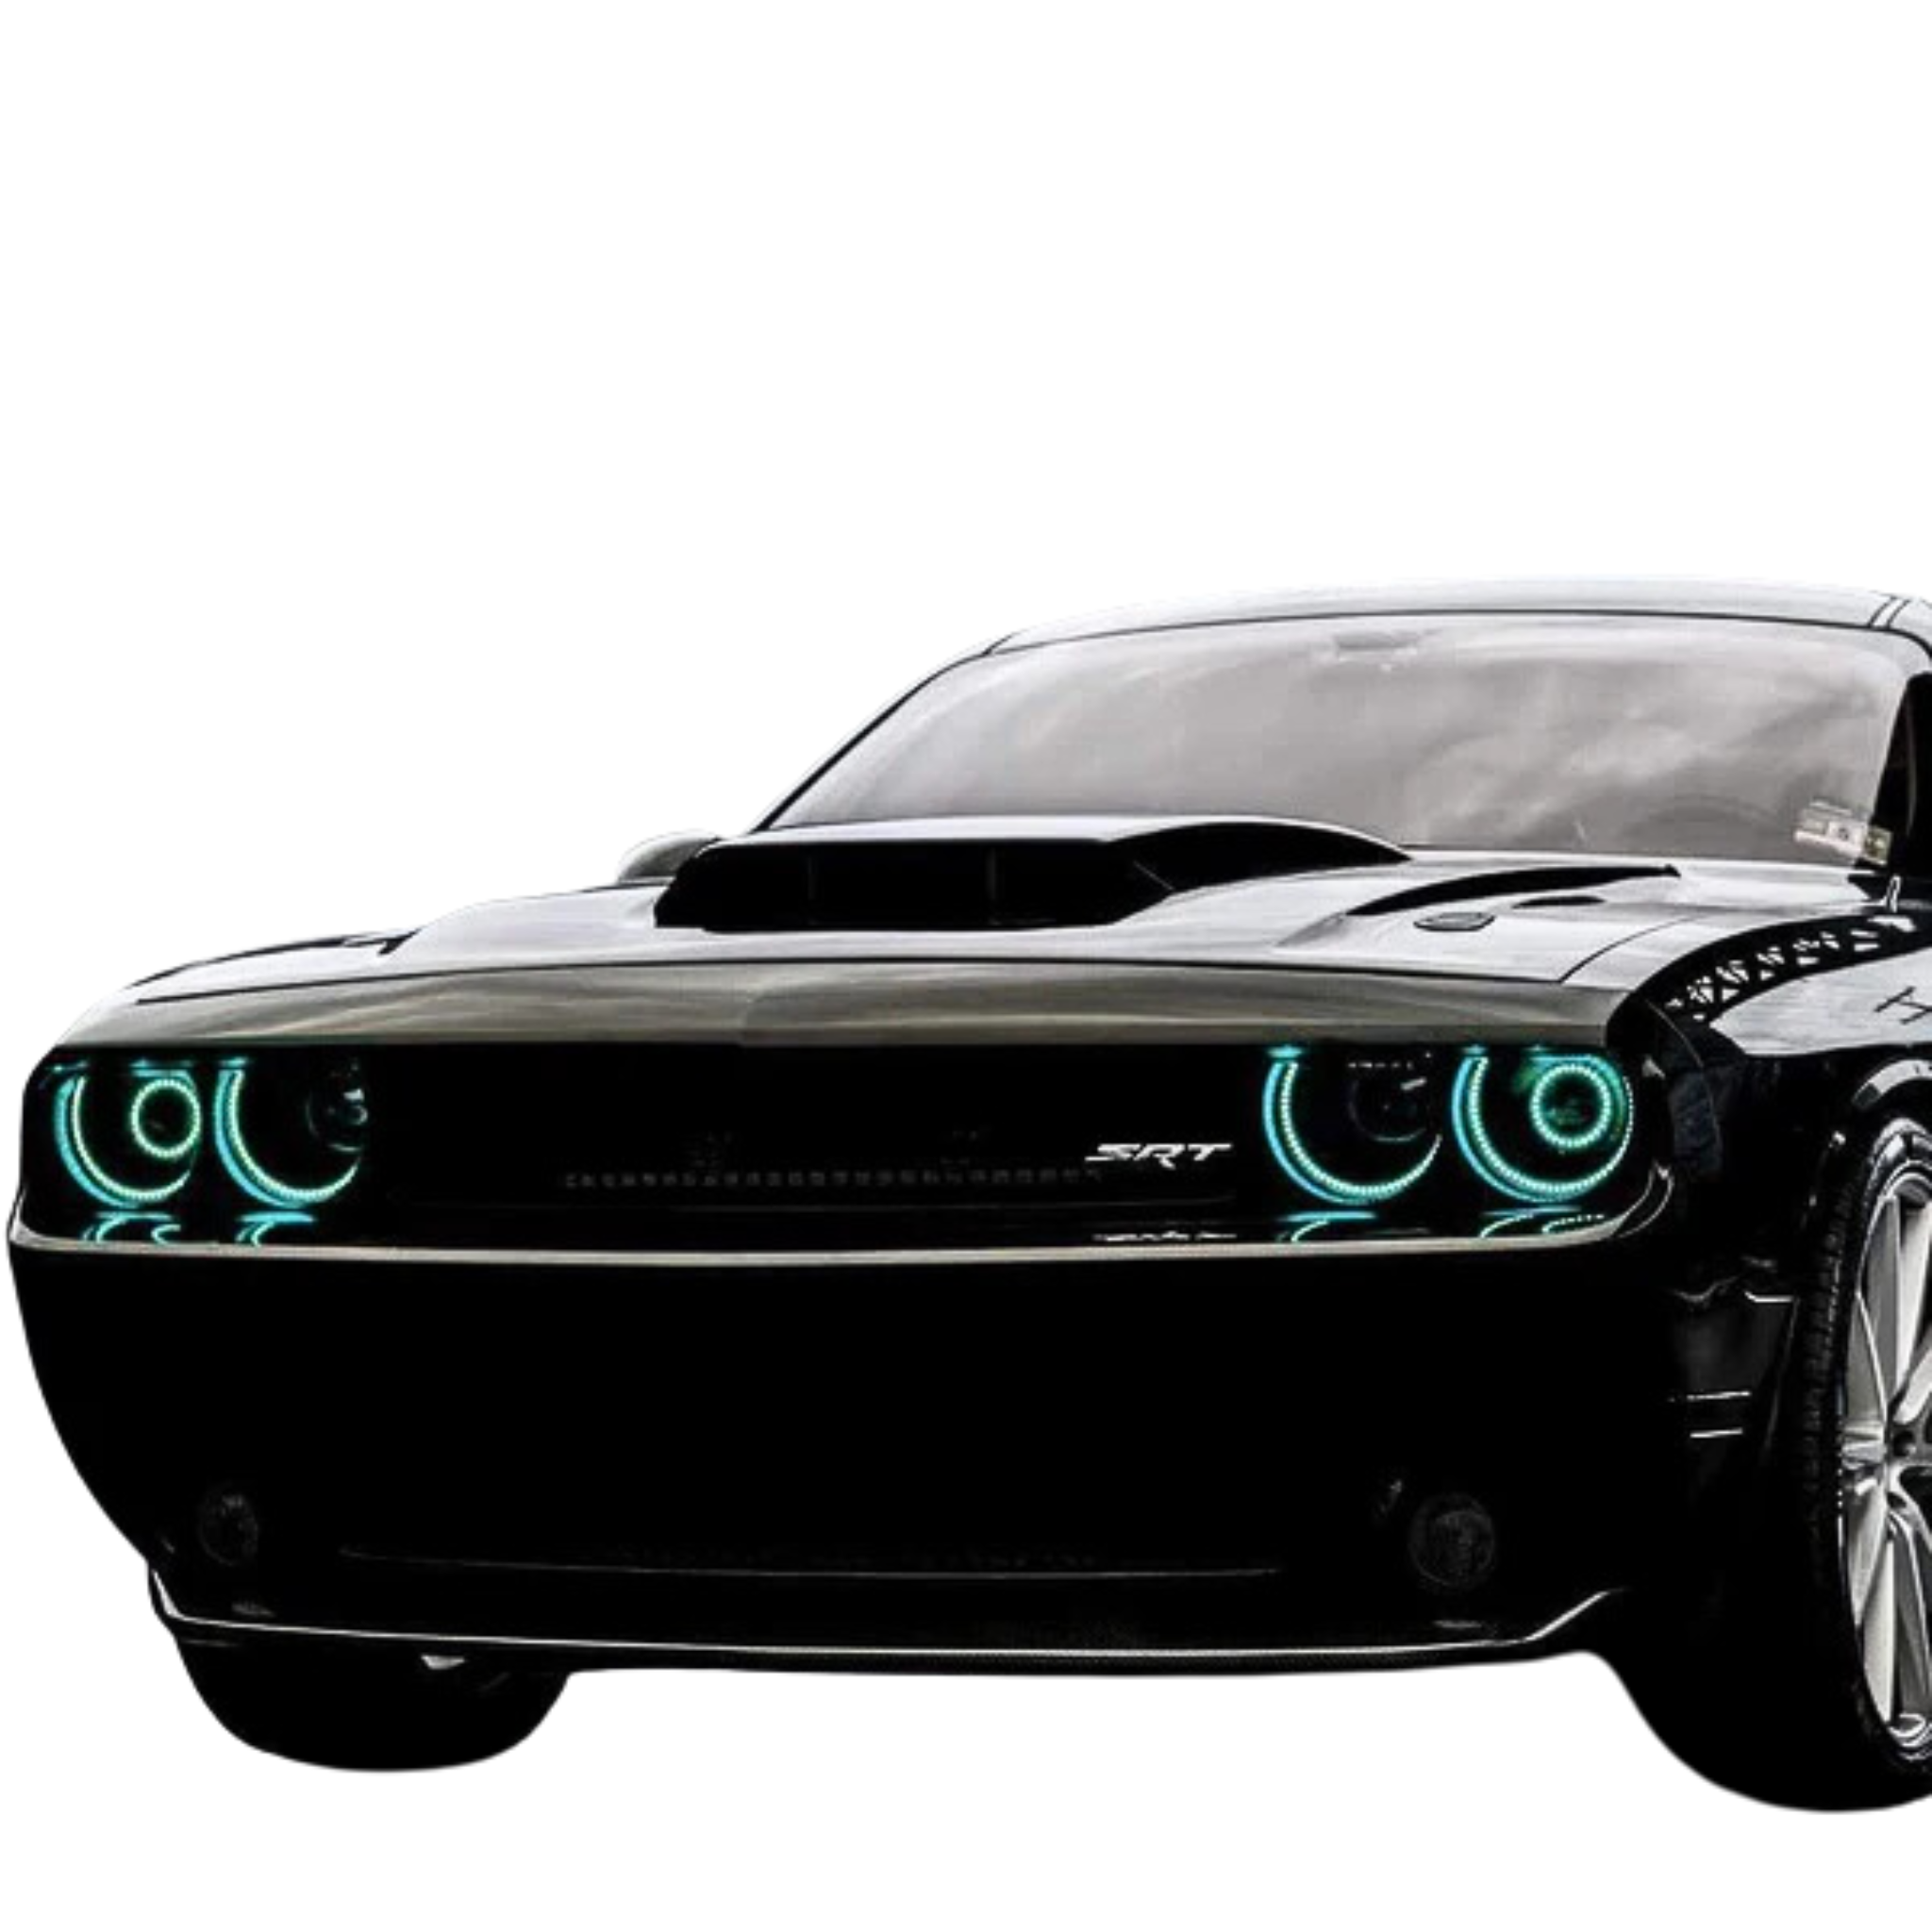 2008-2014 Dodge Challenger Waterproof Exterior Mount Multicolor Halo Kit - RGB Halo Kits Multicolor Flow Series Color Chasing RGBWA LED headlight kit Oracle Lighting Trendz OneUpLighting Morimoto theretrofitsource AutoLEDTech Diode Dynamics